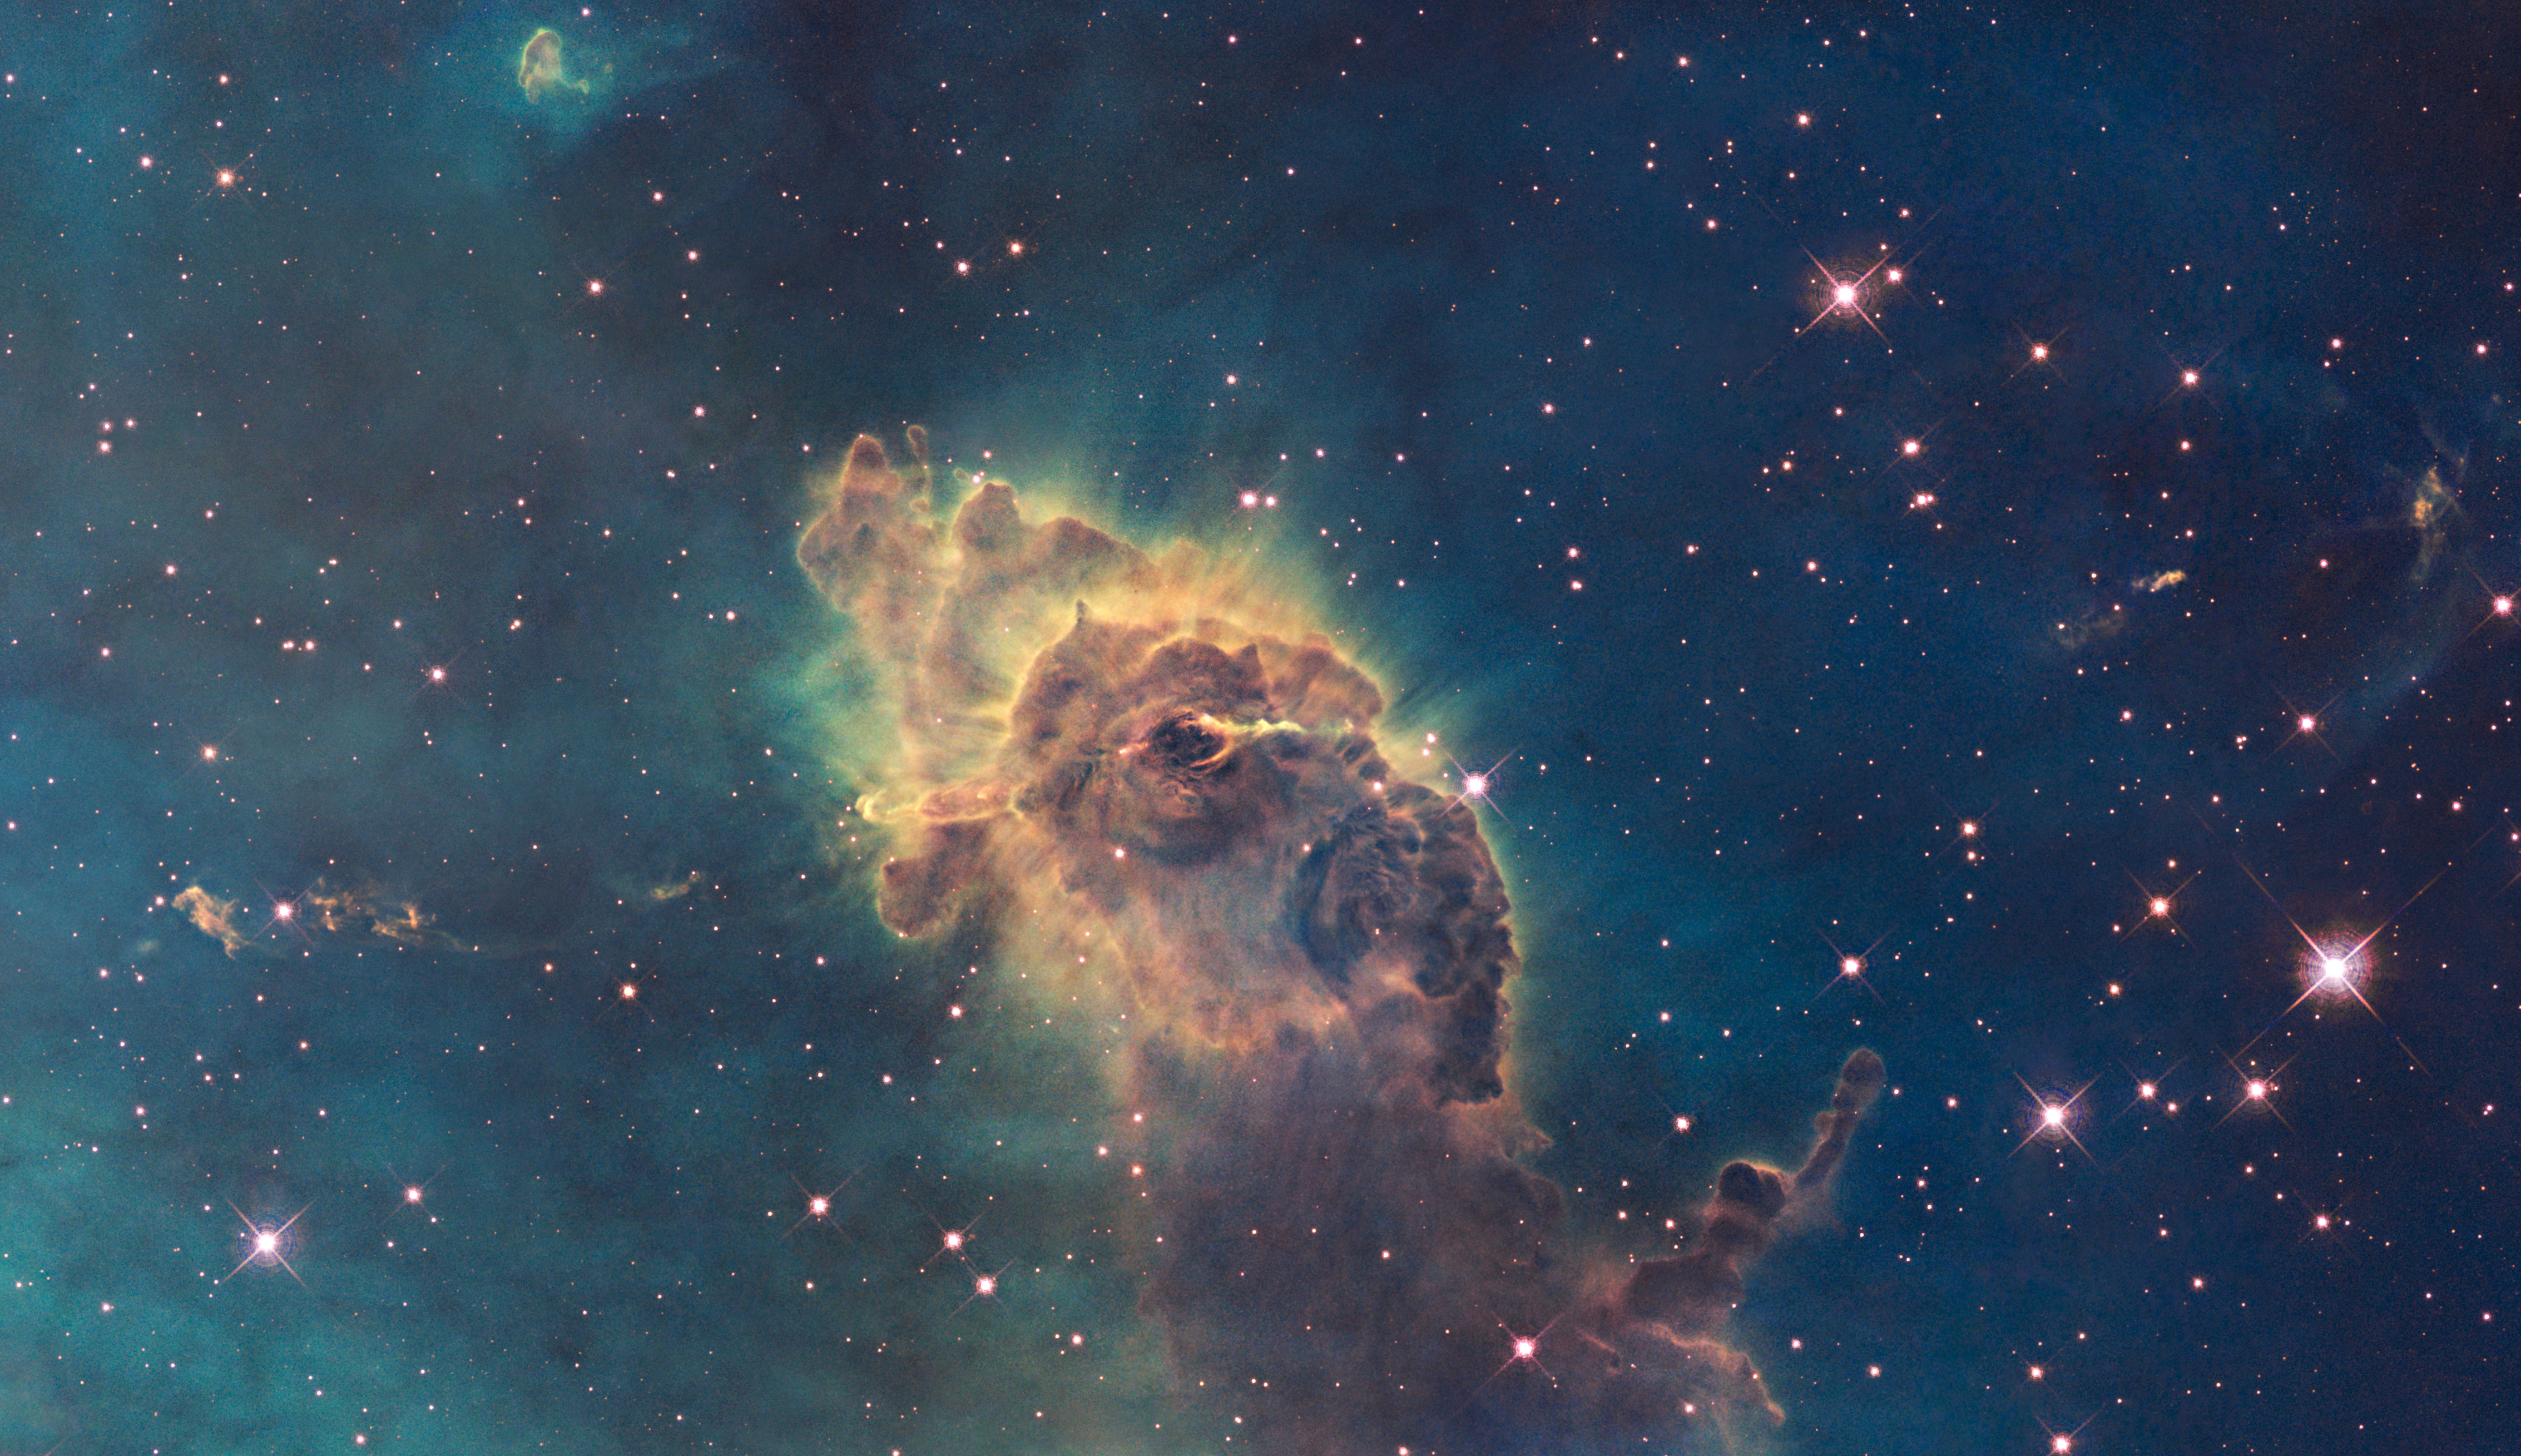 Carina Nebula in visible light (captured by the Hubble Space Telescope)